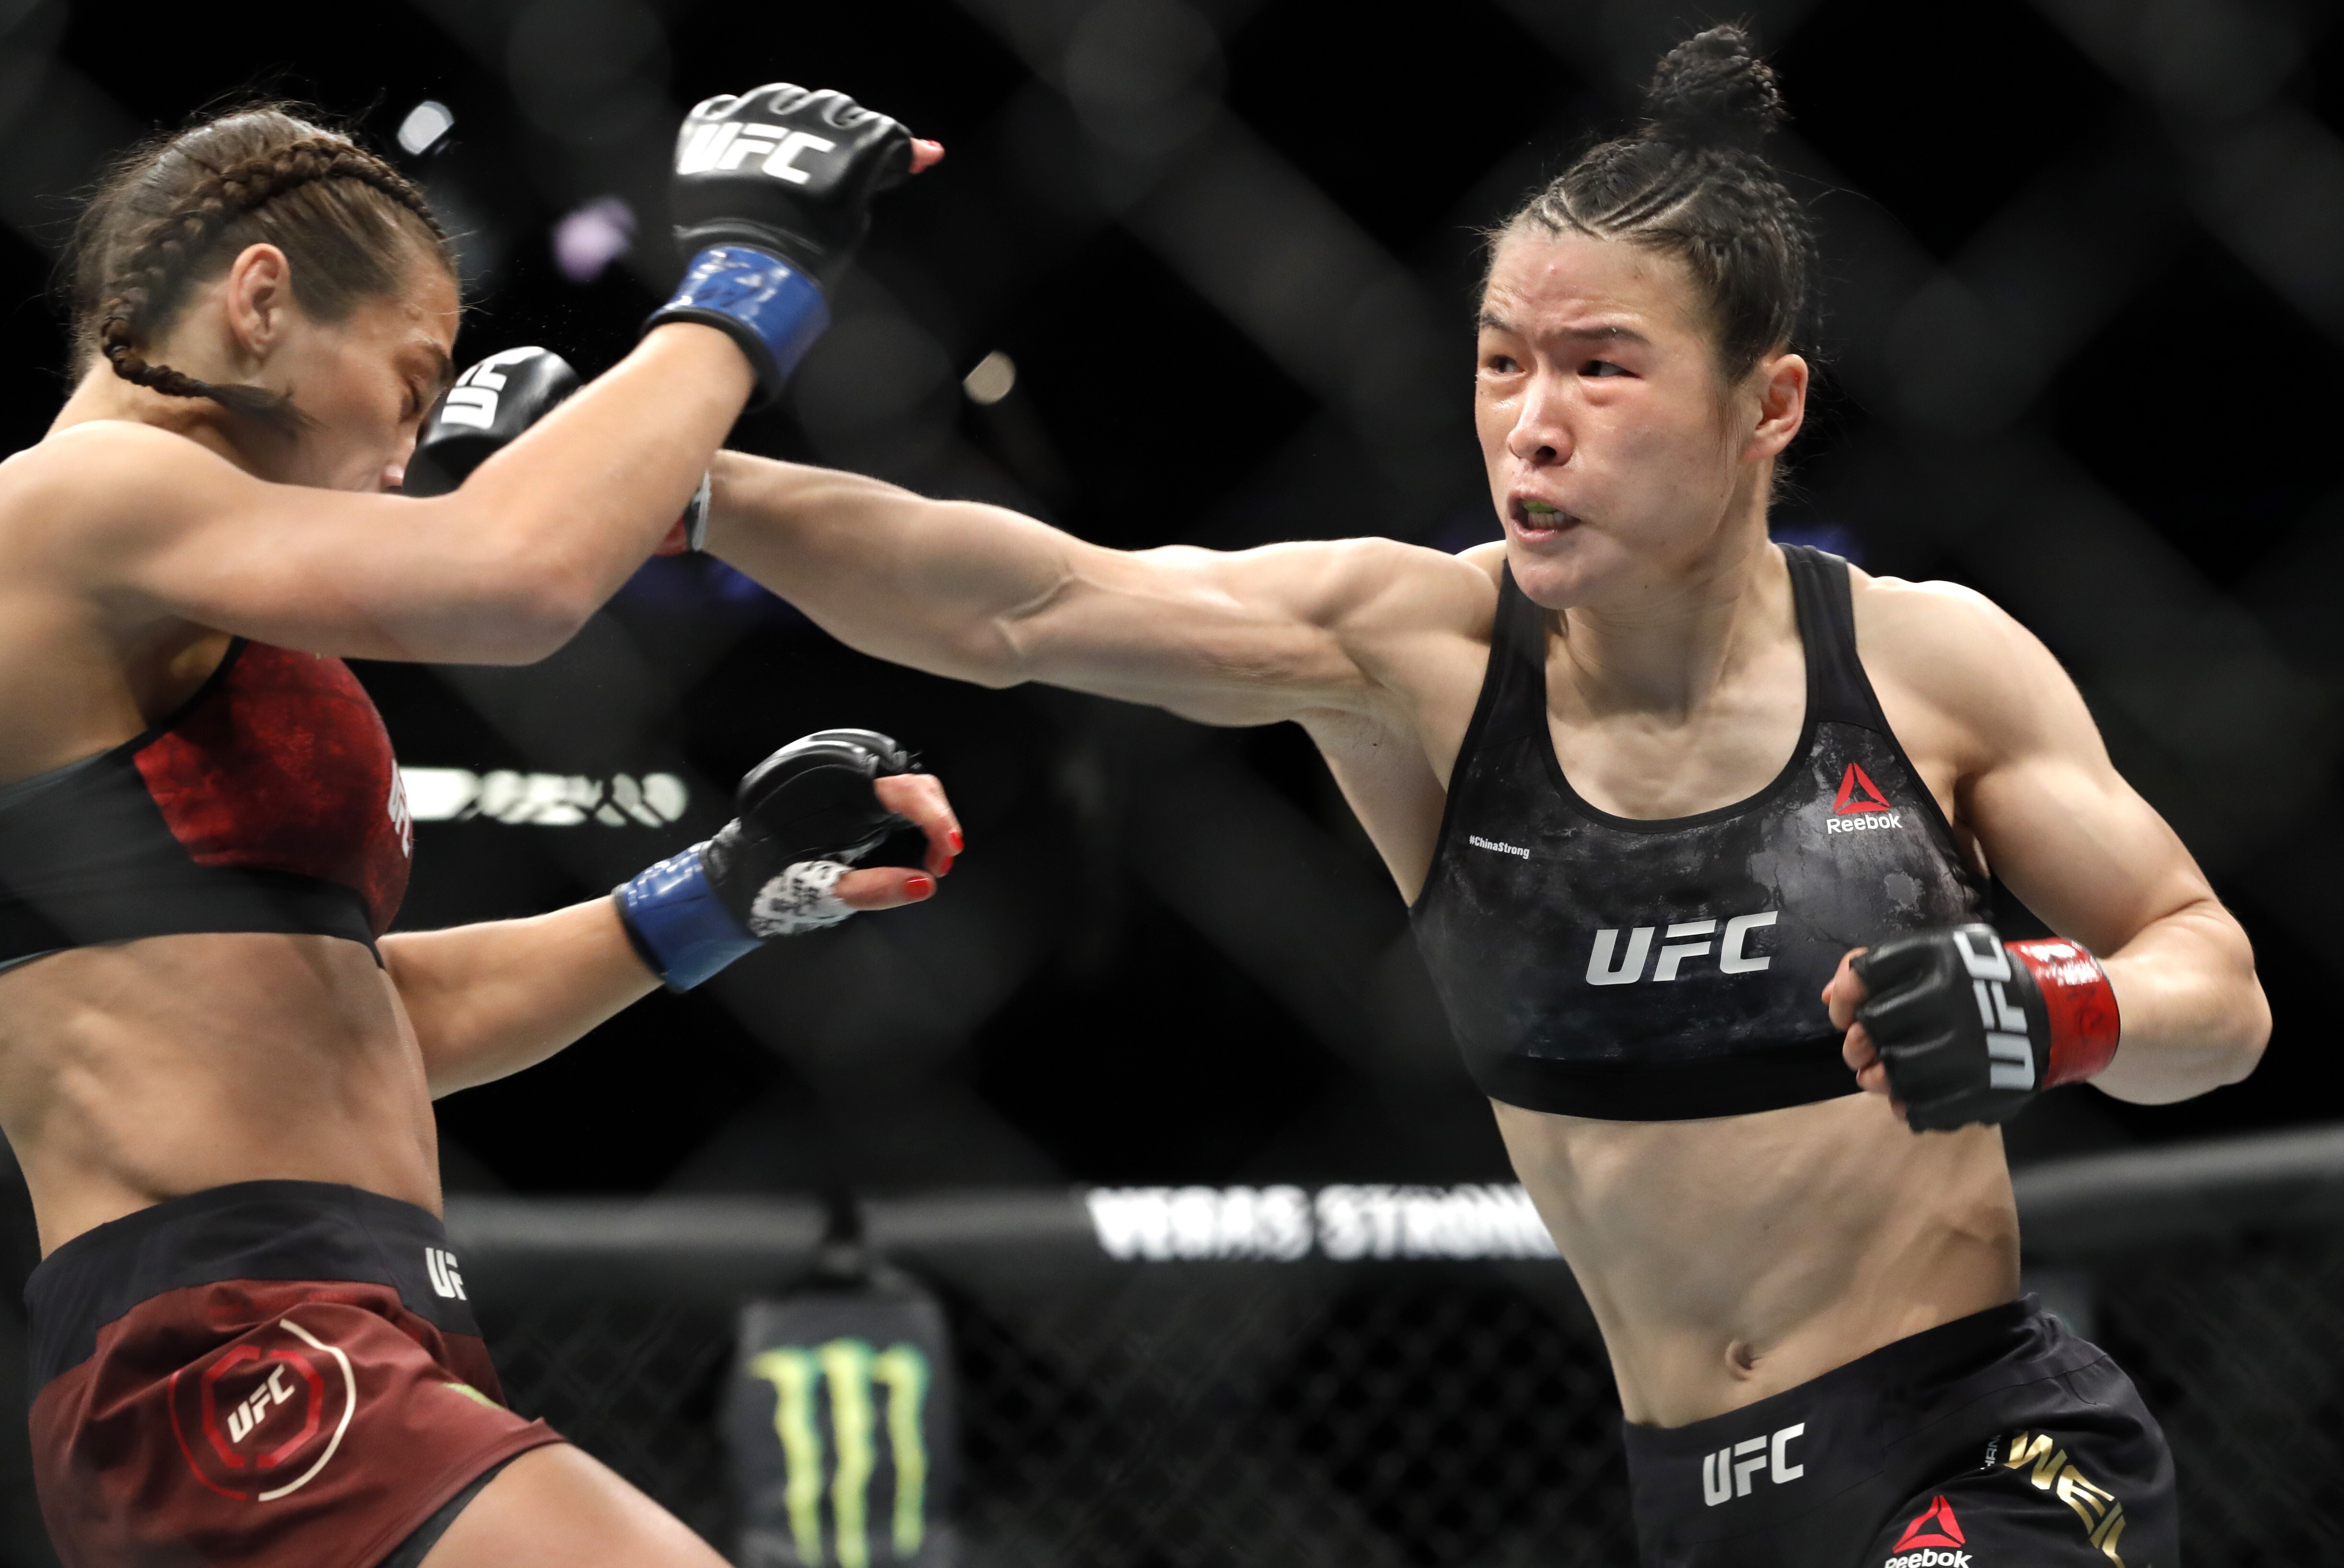 China’s Weili Zhang lands a punch on Poland’s Joanna Jedrzejczyk at UFC 248 at T-Mobile Arena in Las Vegas in March. Photo: AP